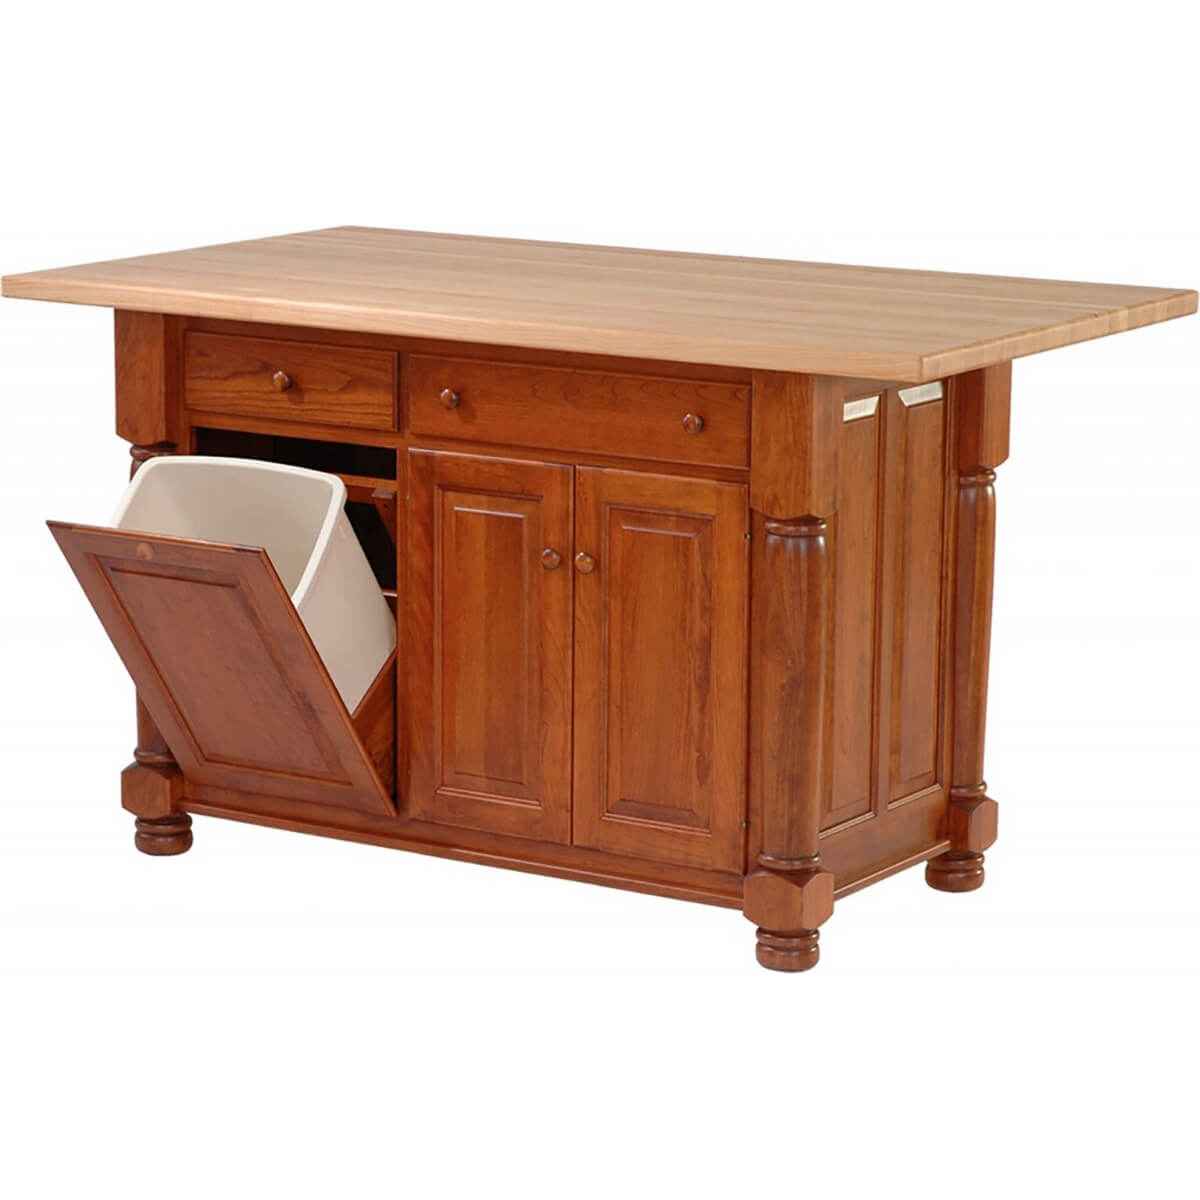 Read more about the article Turned Leg Kitchen Island Cabinet with Wastebasket Tilt-Out